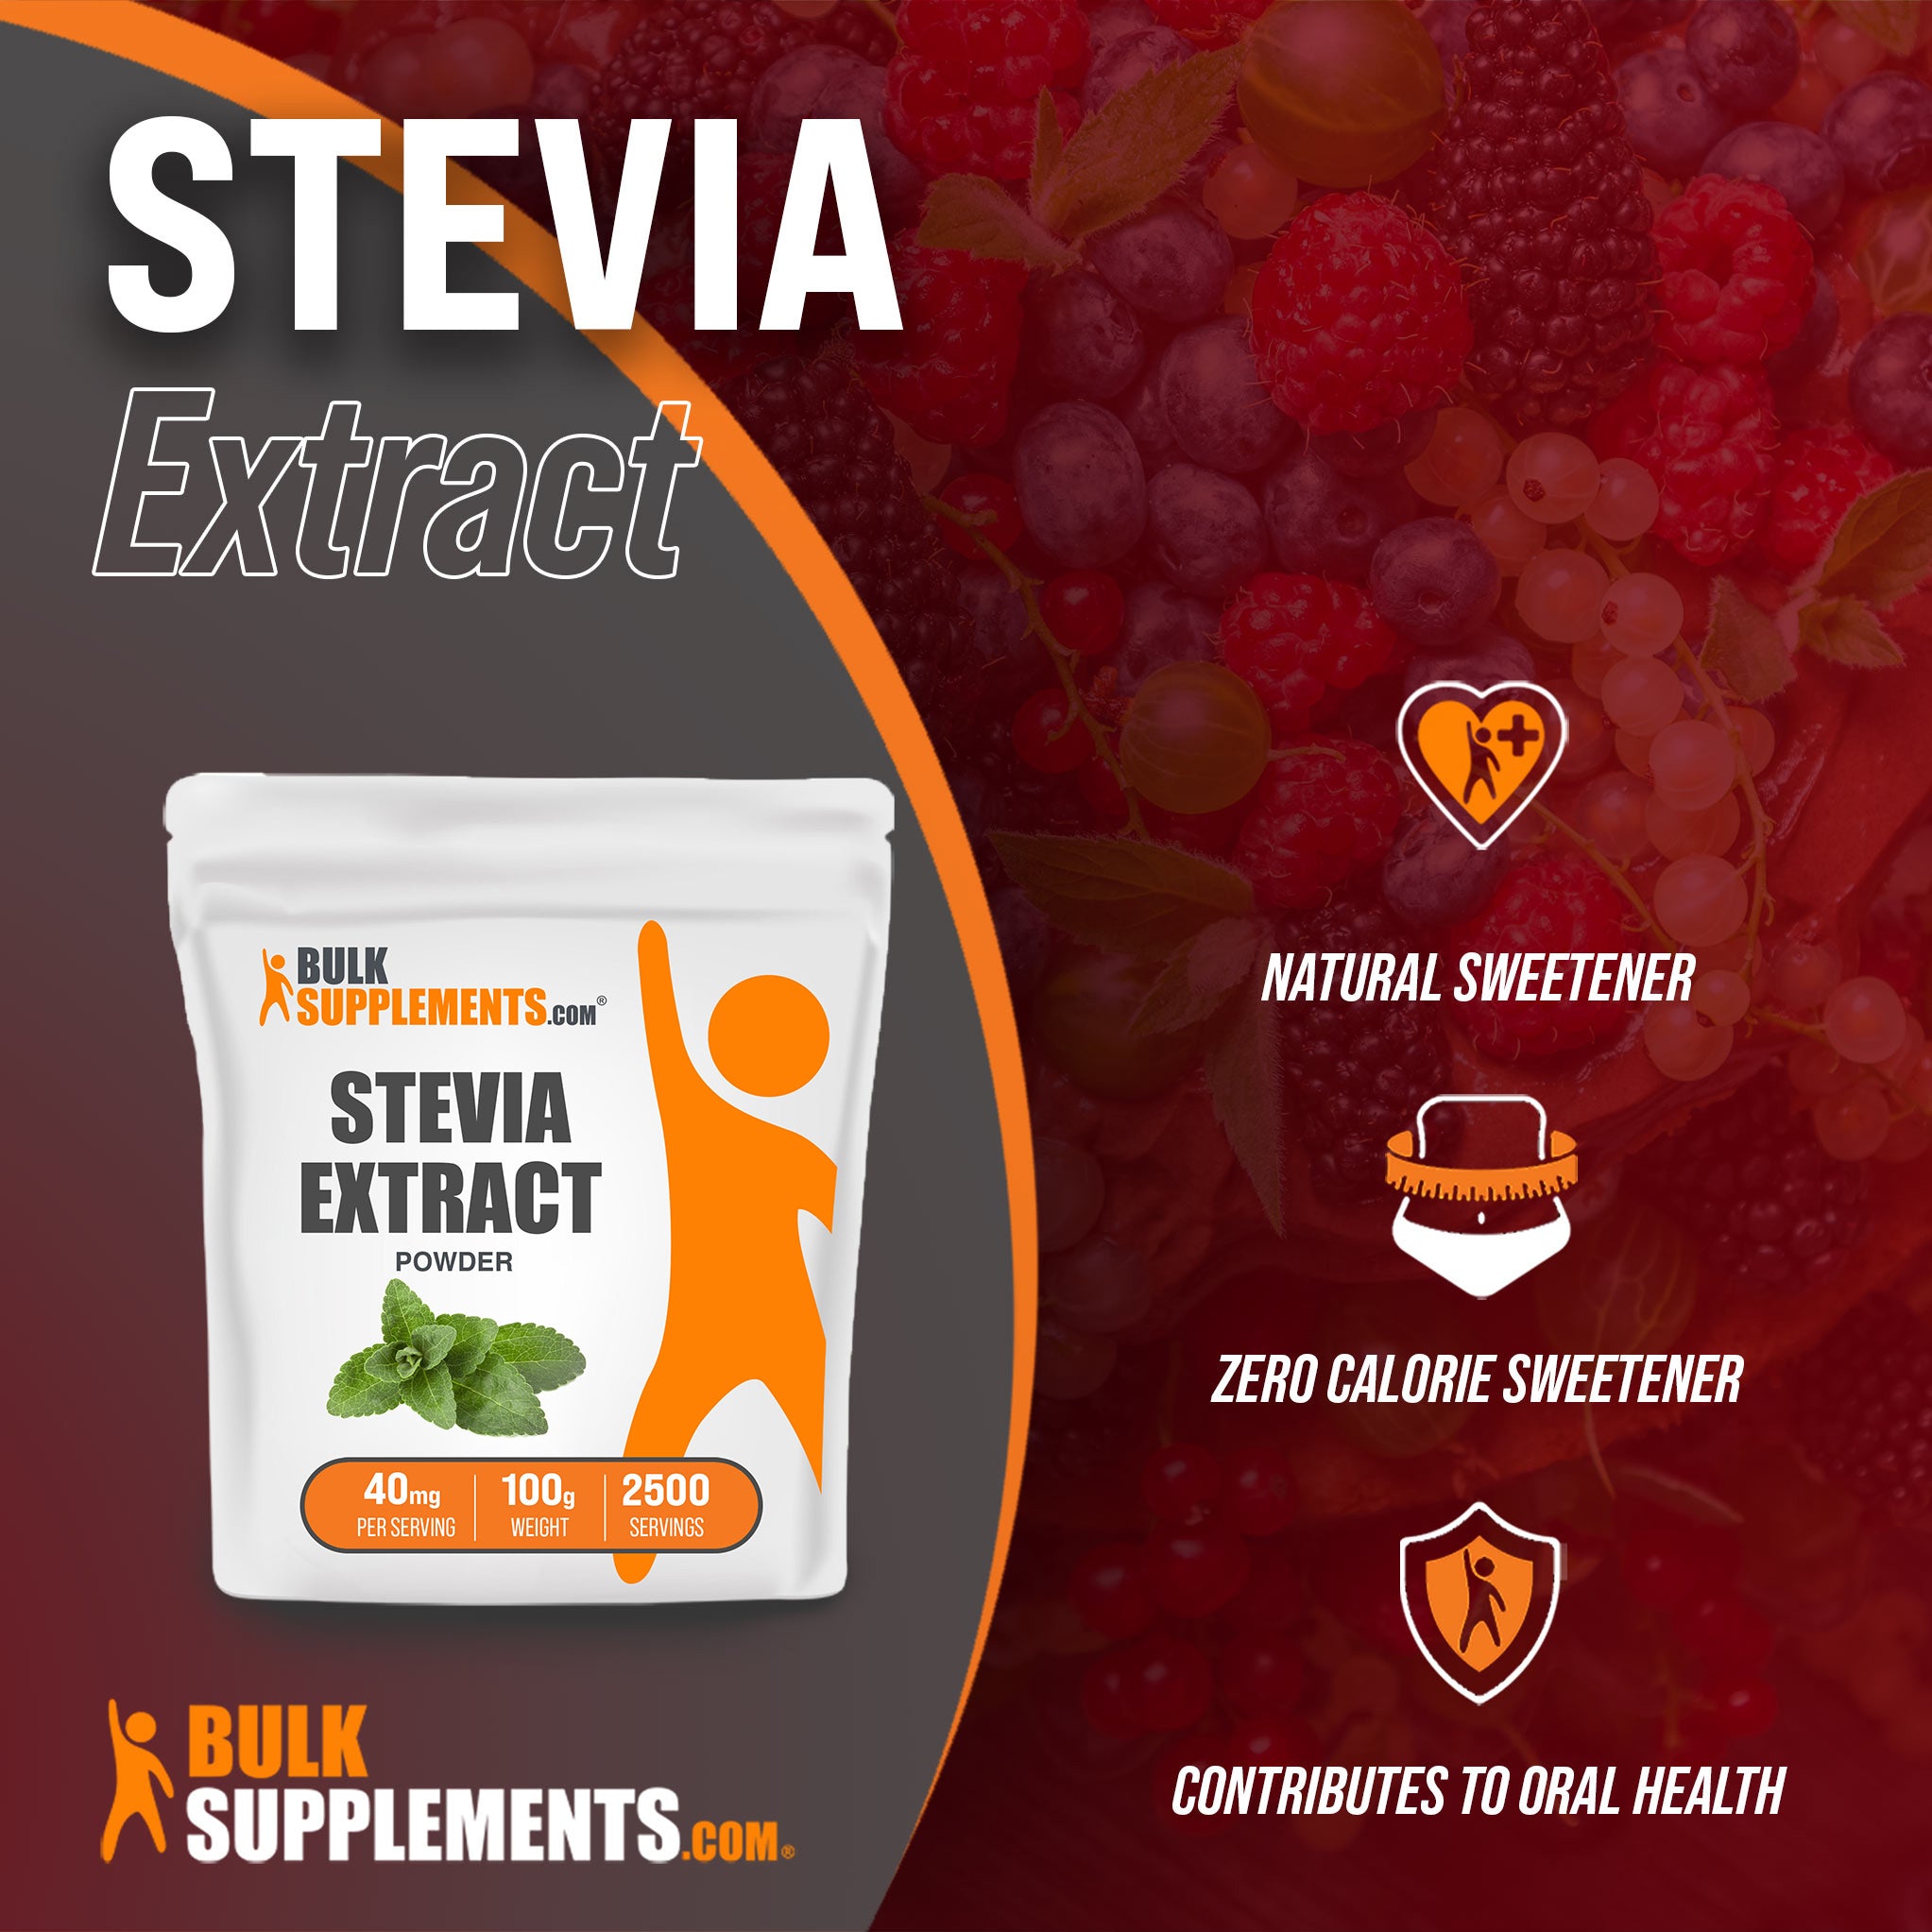 Benefits of Stevia Extract: natural sweetener, zero calorie sweetener, contributes to oral health